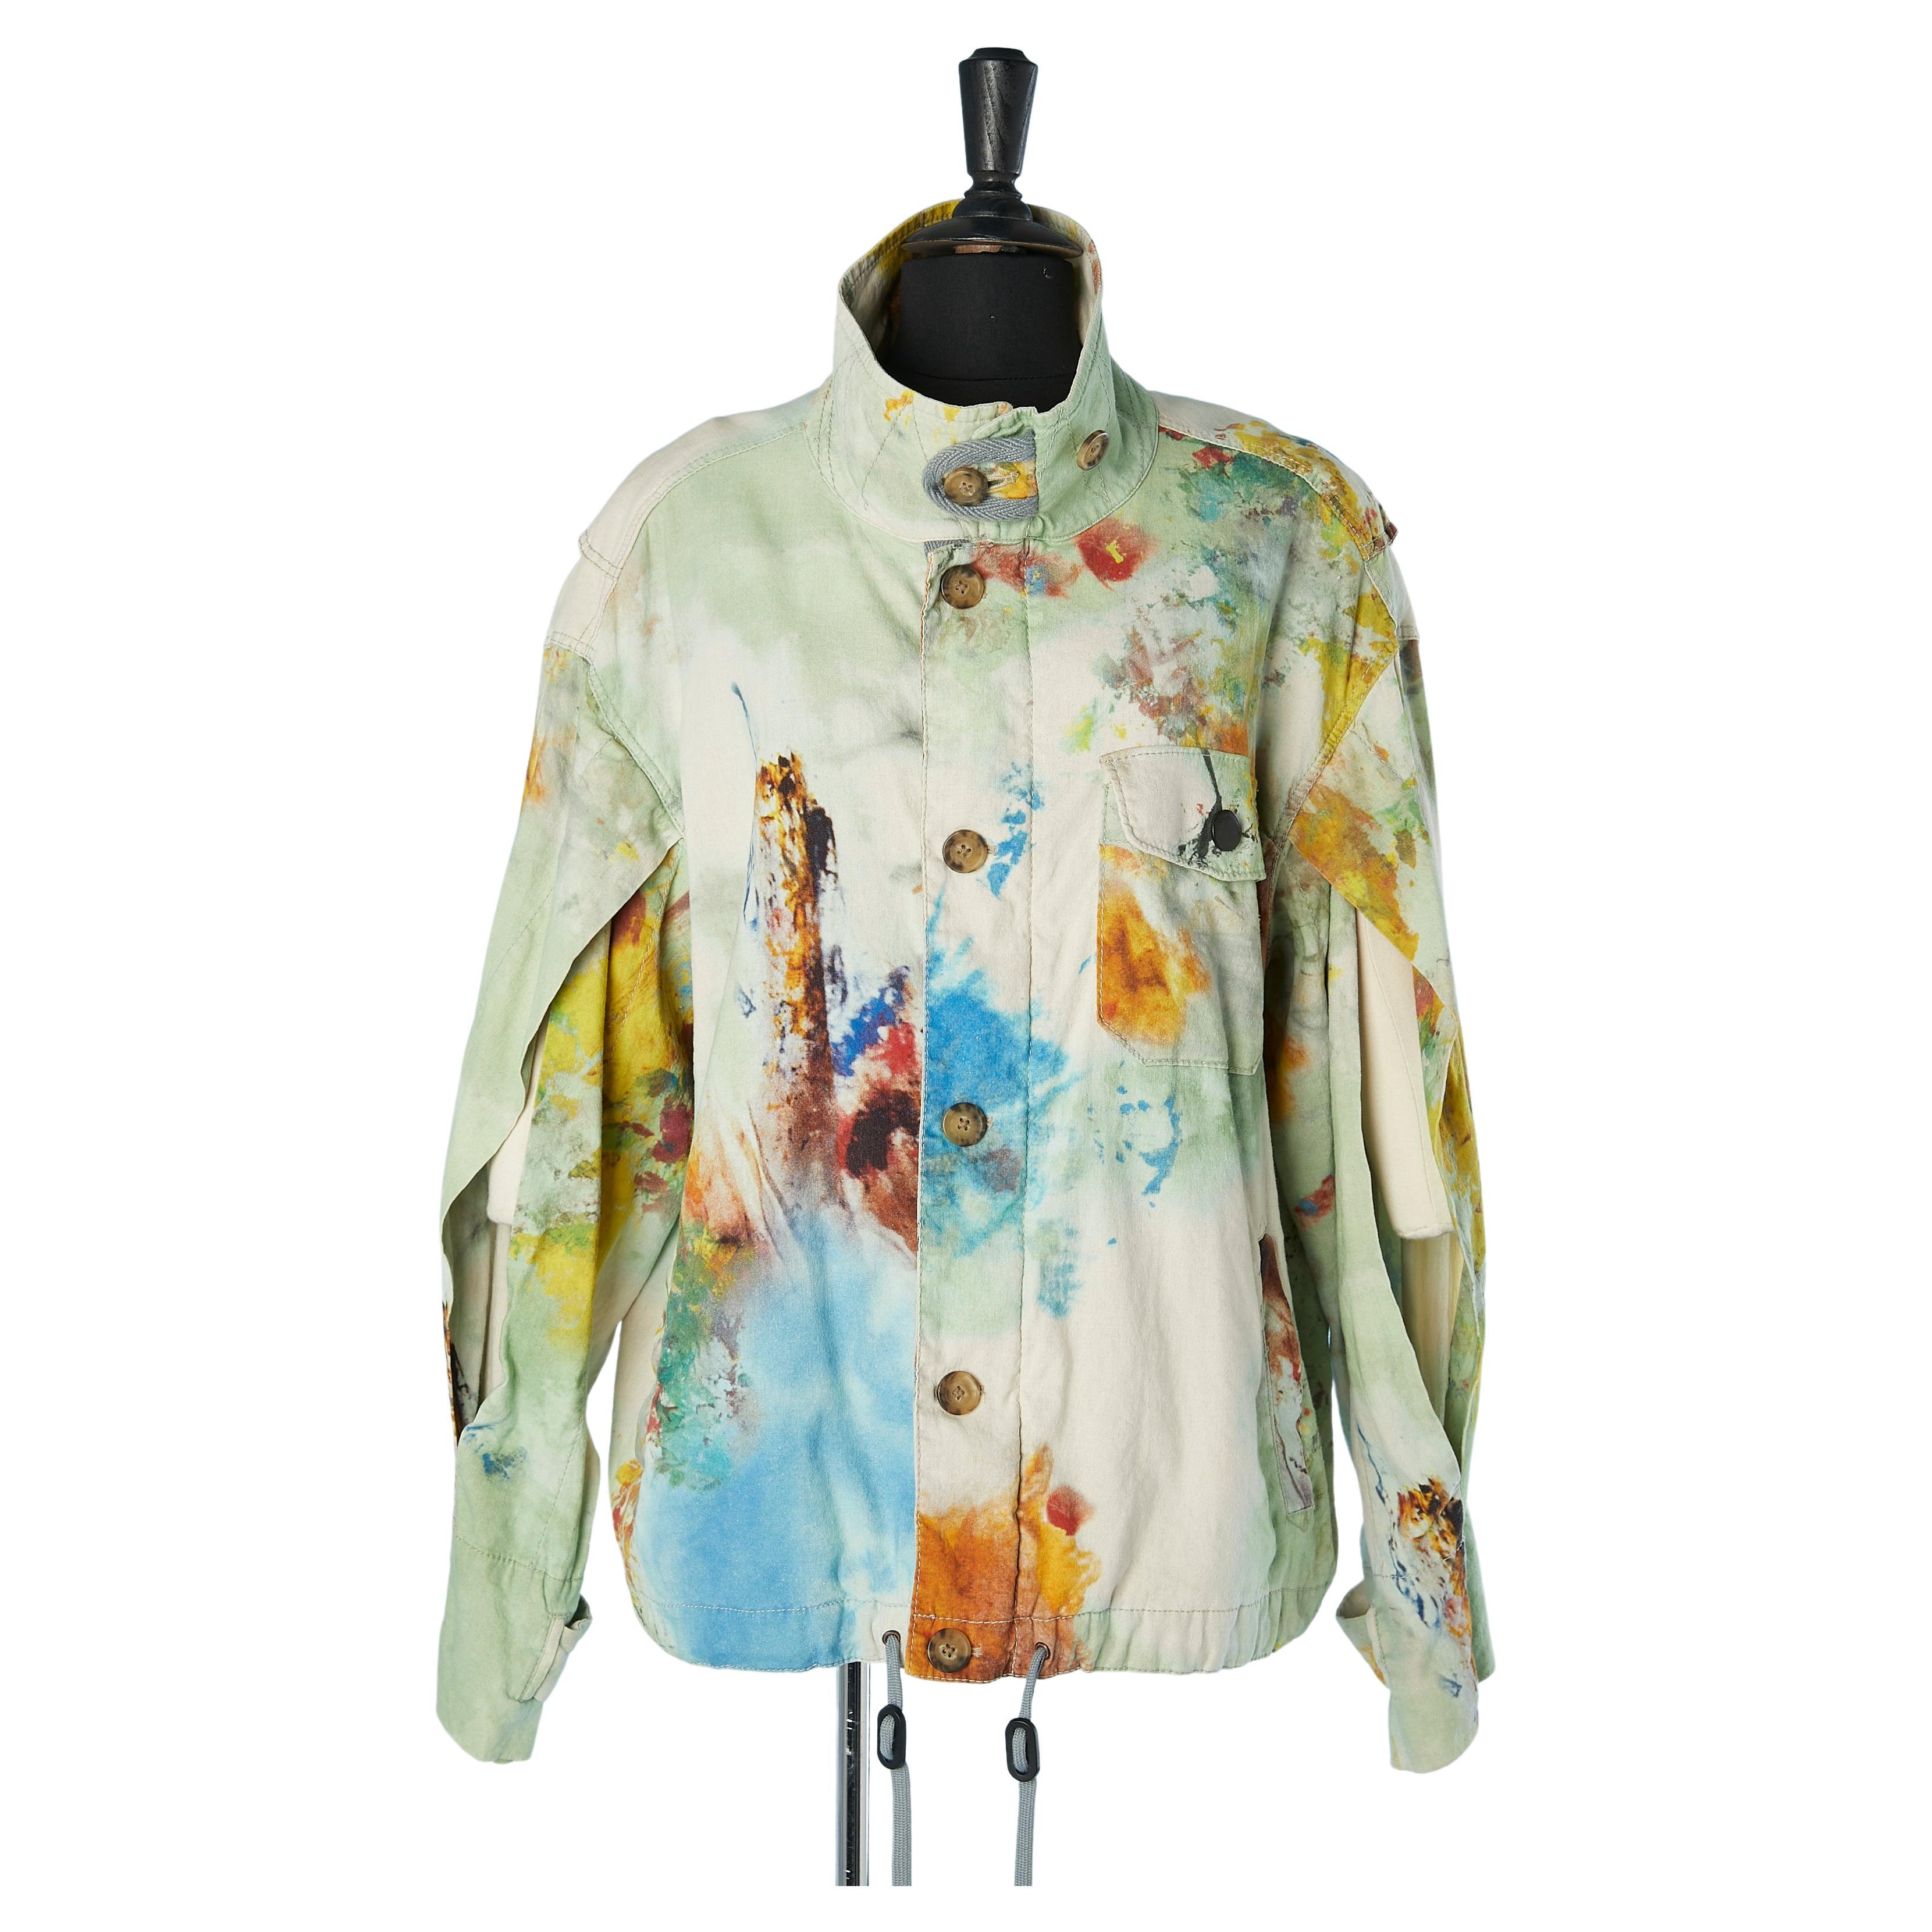 Men cotton & linen jacket with painting splatches print V Westwood Anglomania 